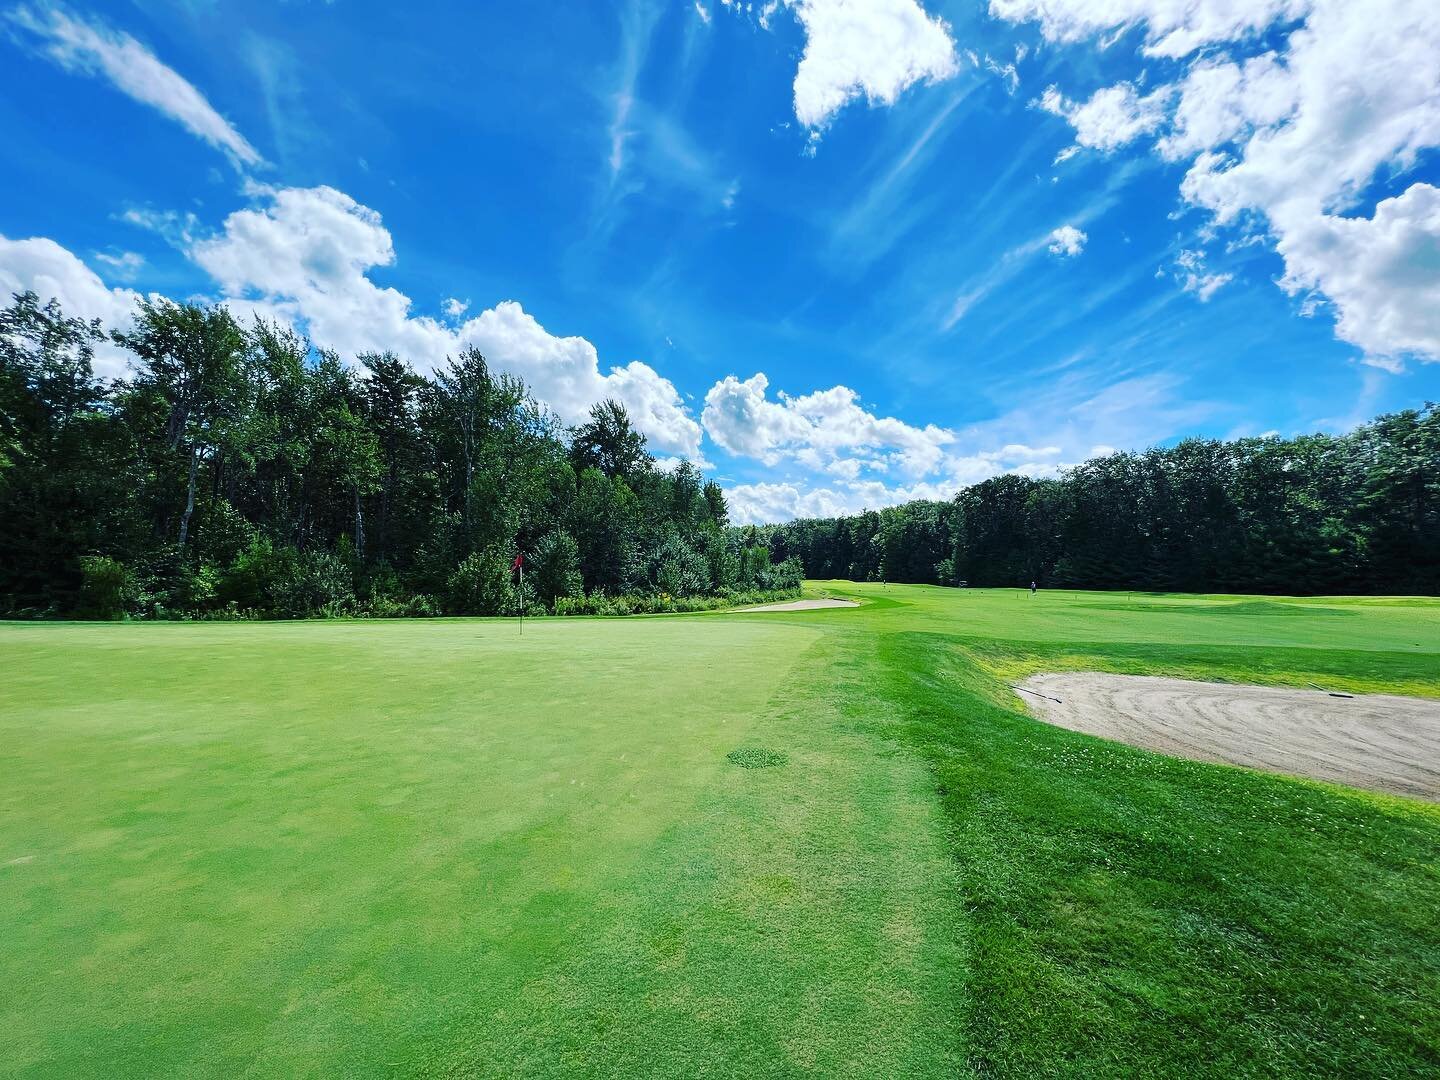 Today and tomorrow we welcome the @maine_golf B &amp; C championship! The golf course is in fantastic shape, best of luck to all the players! #tournamentgolf #mainegolf #golow #skipworkplaygolf #wellsmaine